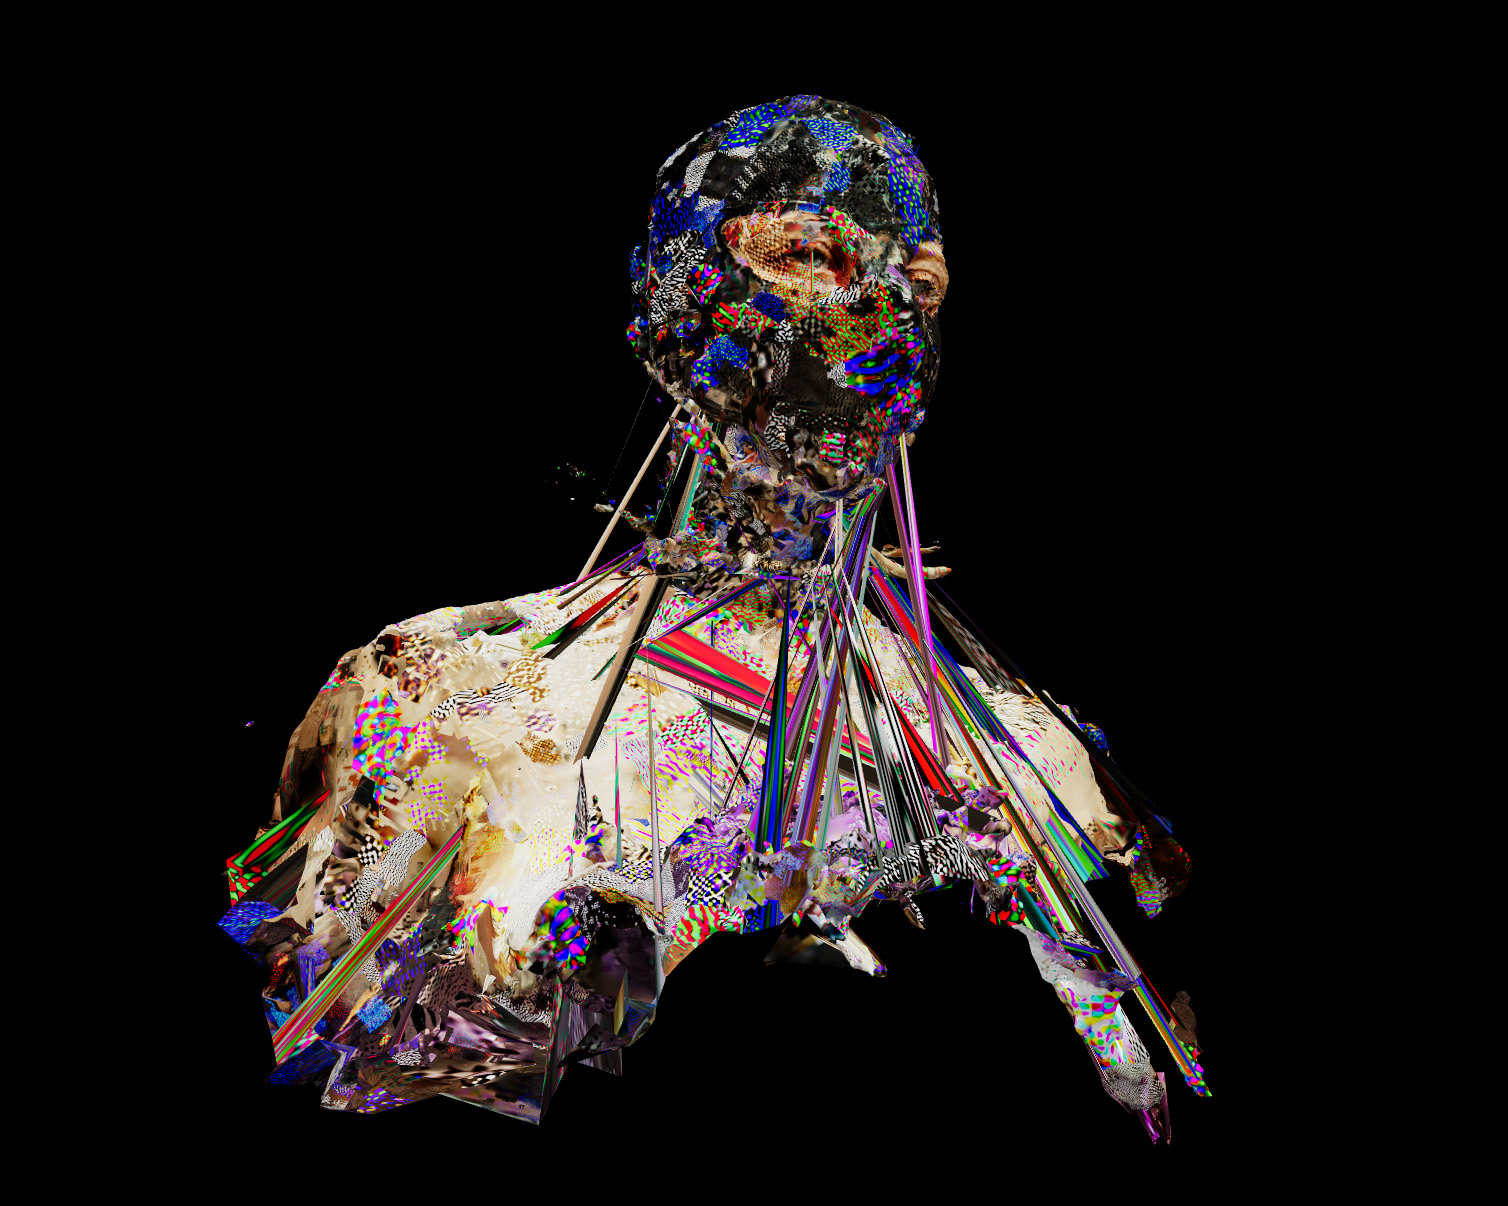 A glitchy image of a human figure from the chest up, against a black background